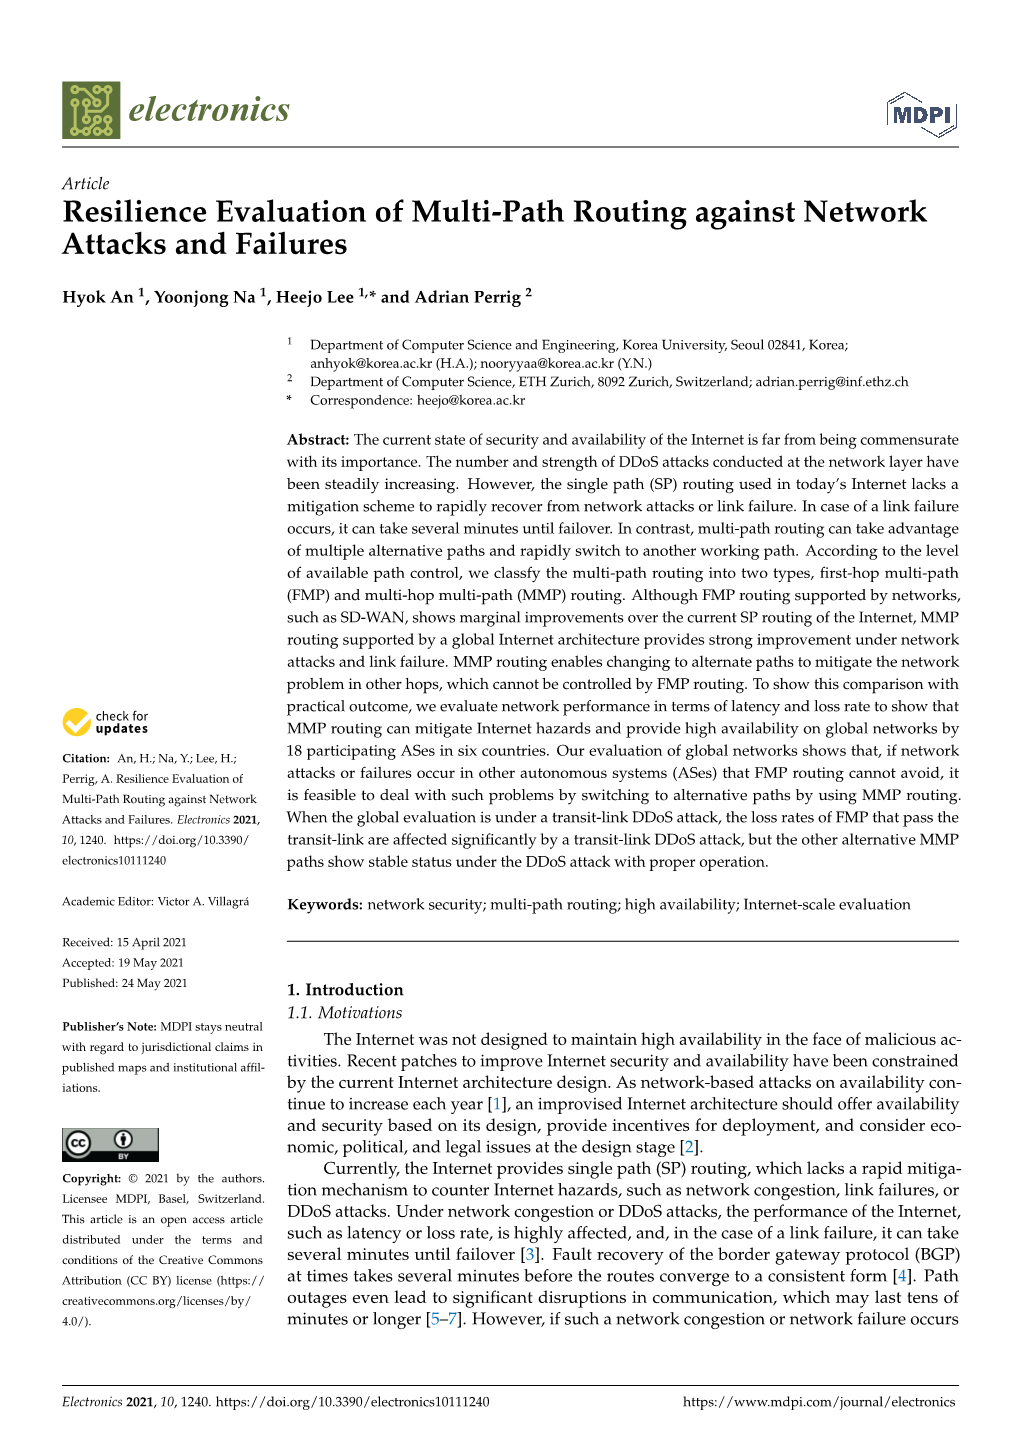 Resilience Evaluation of Multi-Path Routing Against Network Attacks and Failures